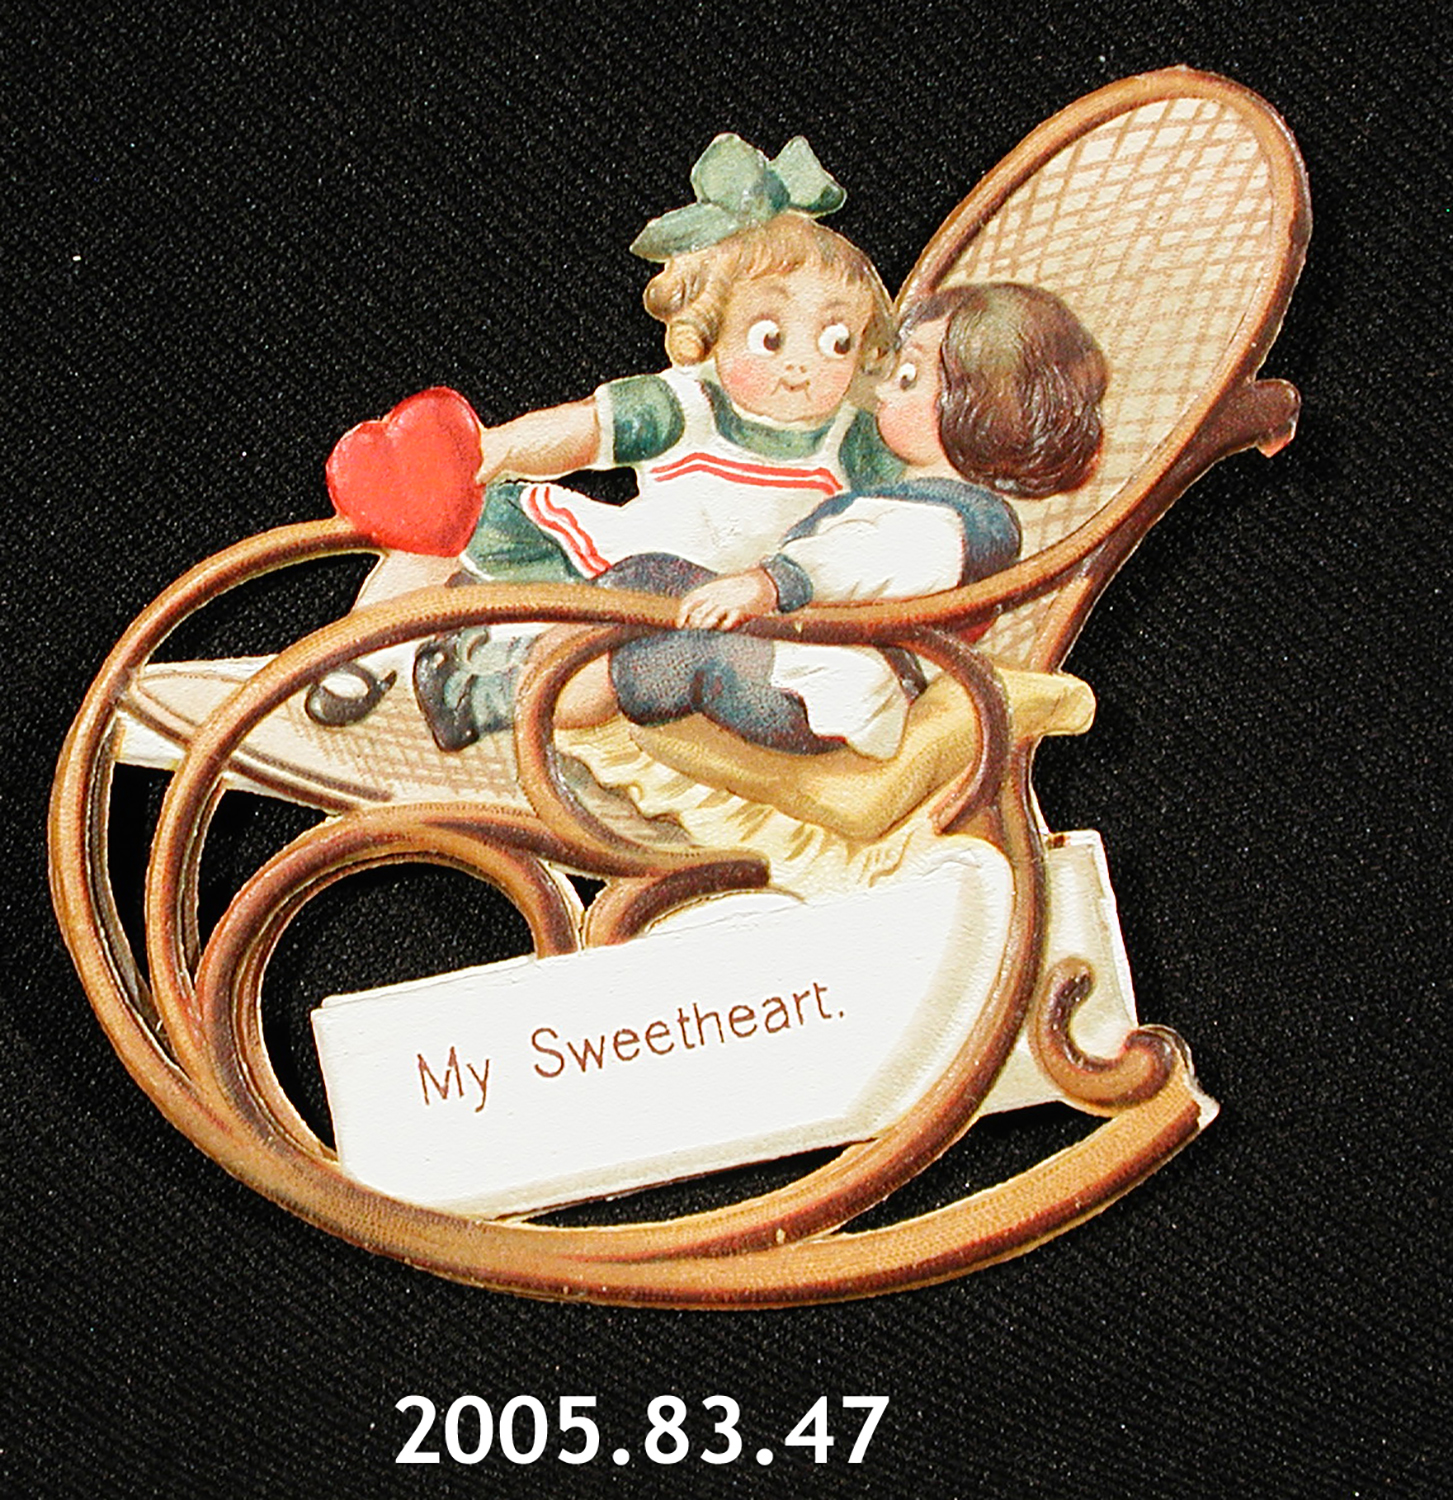 A valentine card depicting two children in a rocking chair. It reads: "My sweetheart."